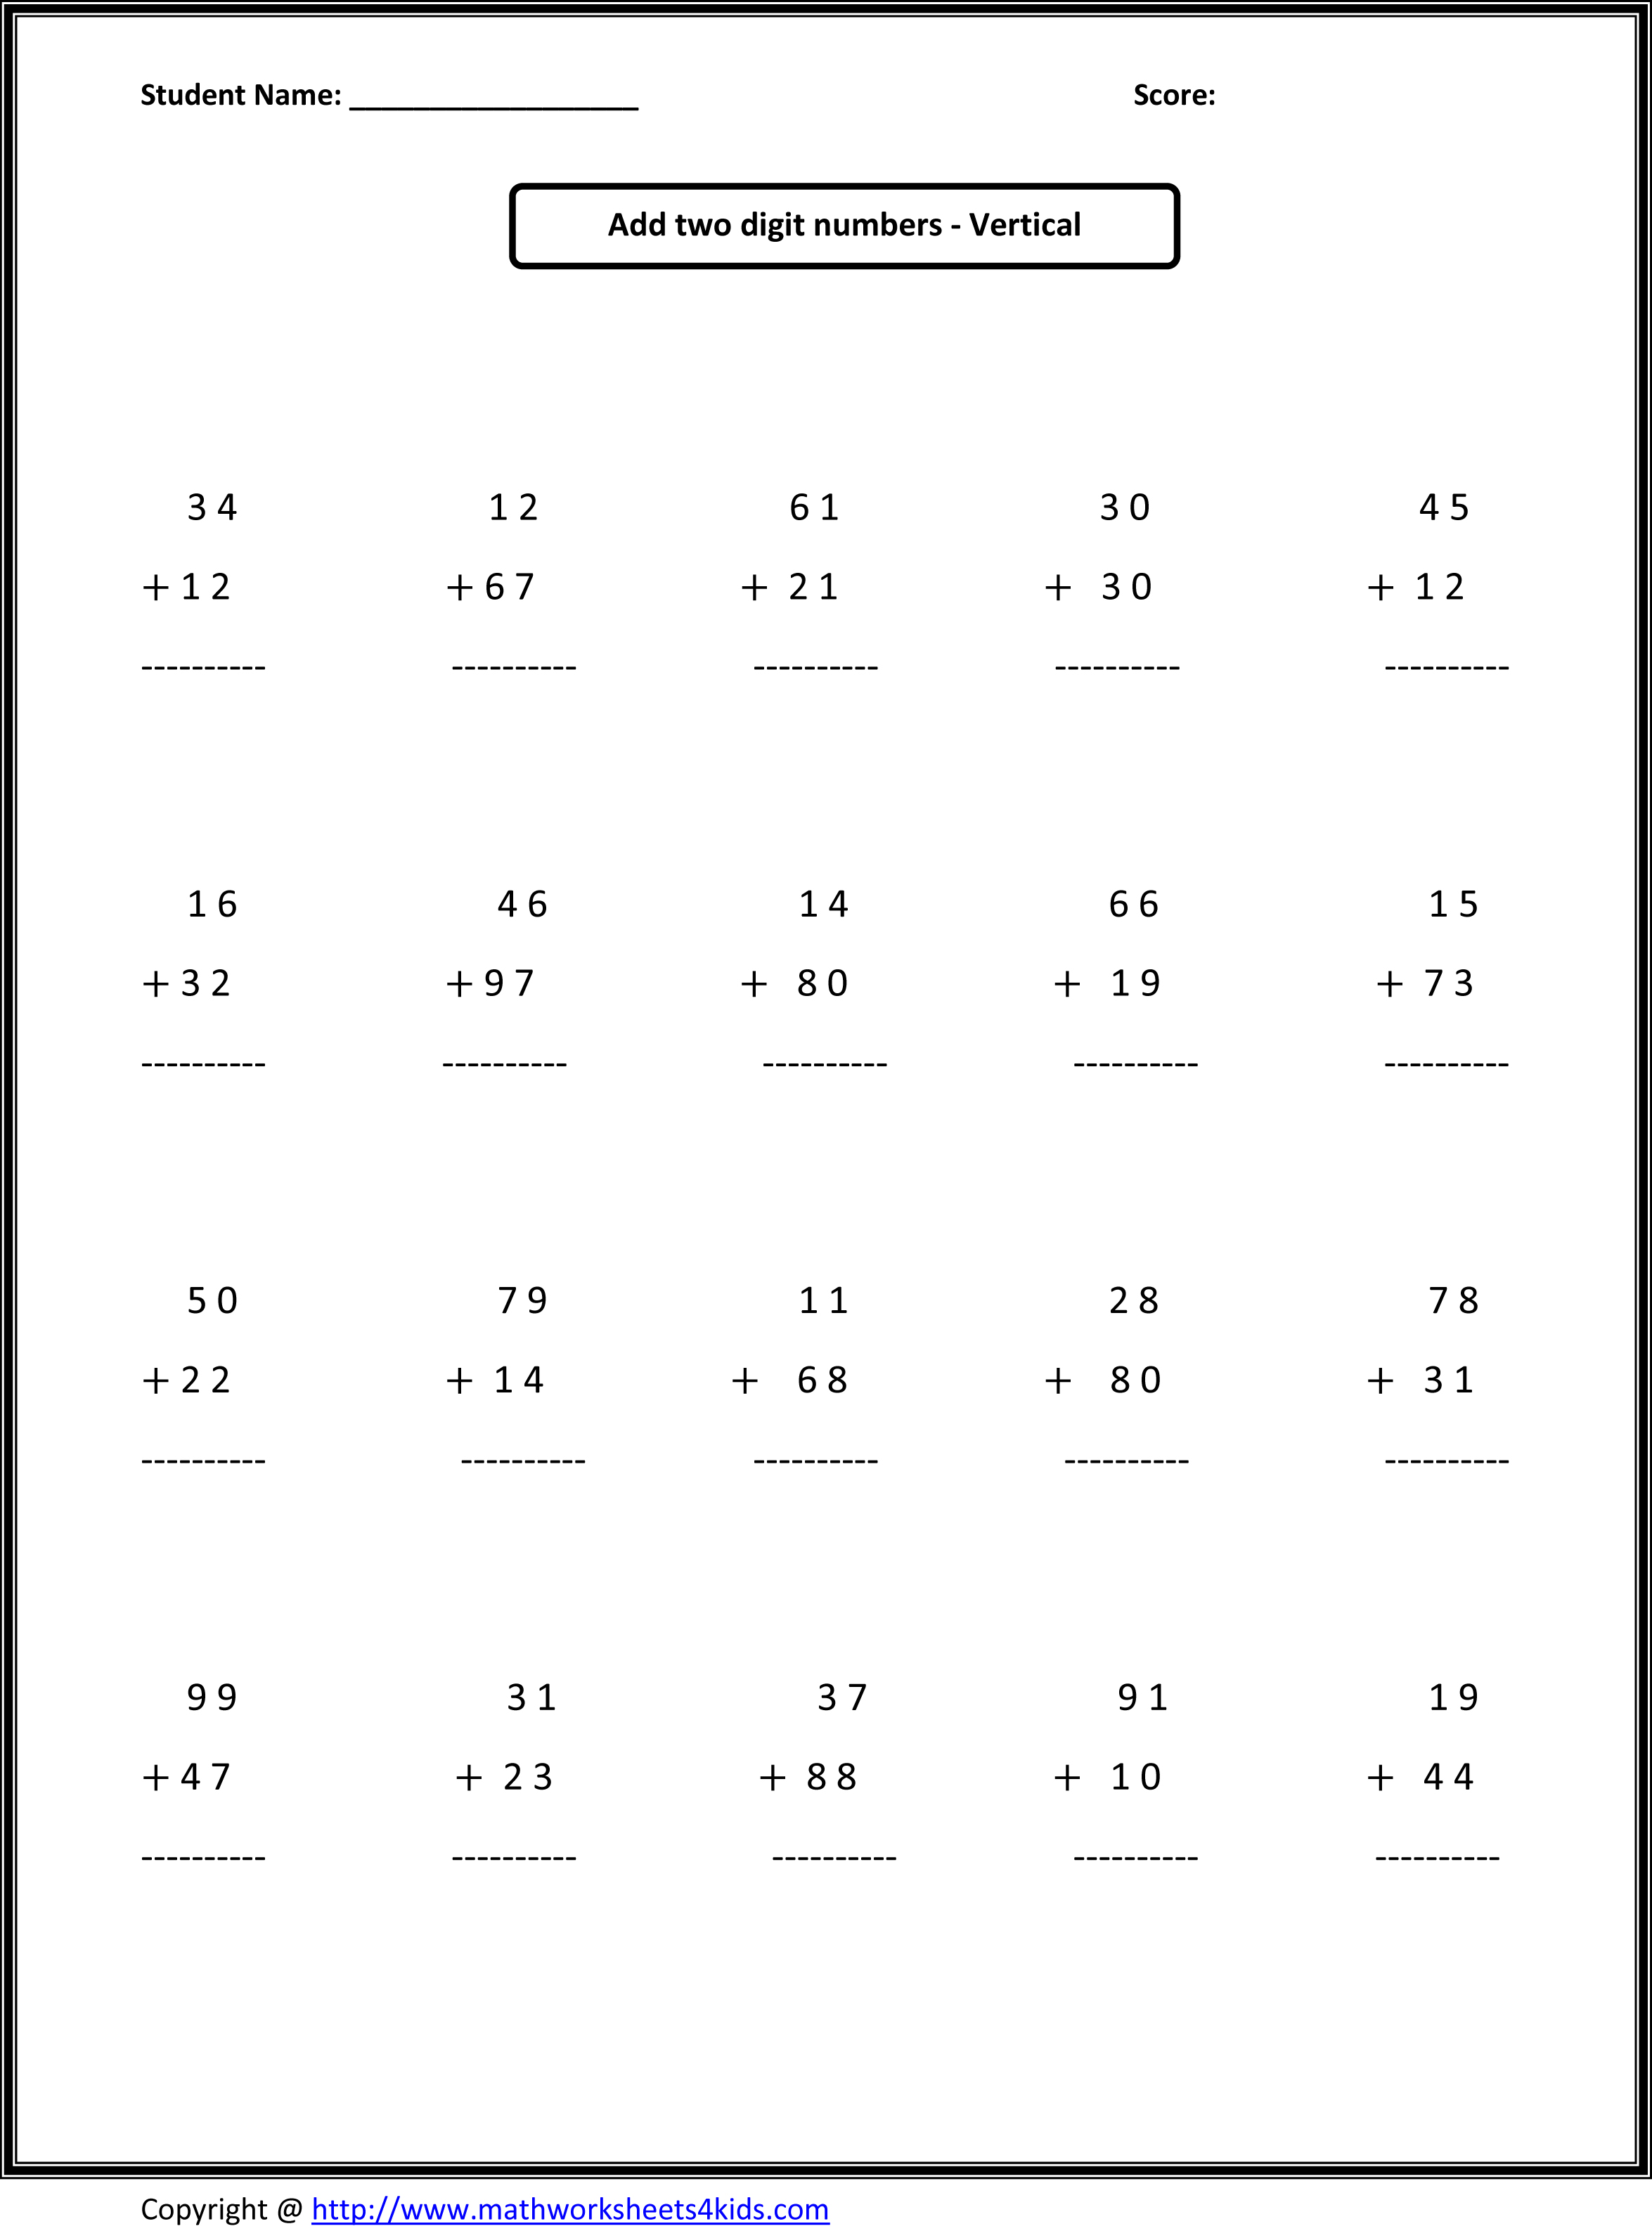 15-100-addition-and-subtraction-facts-worksheet-worksheeto